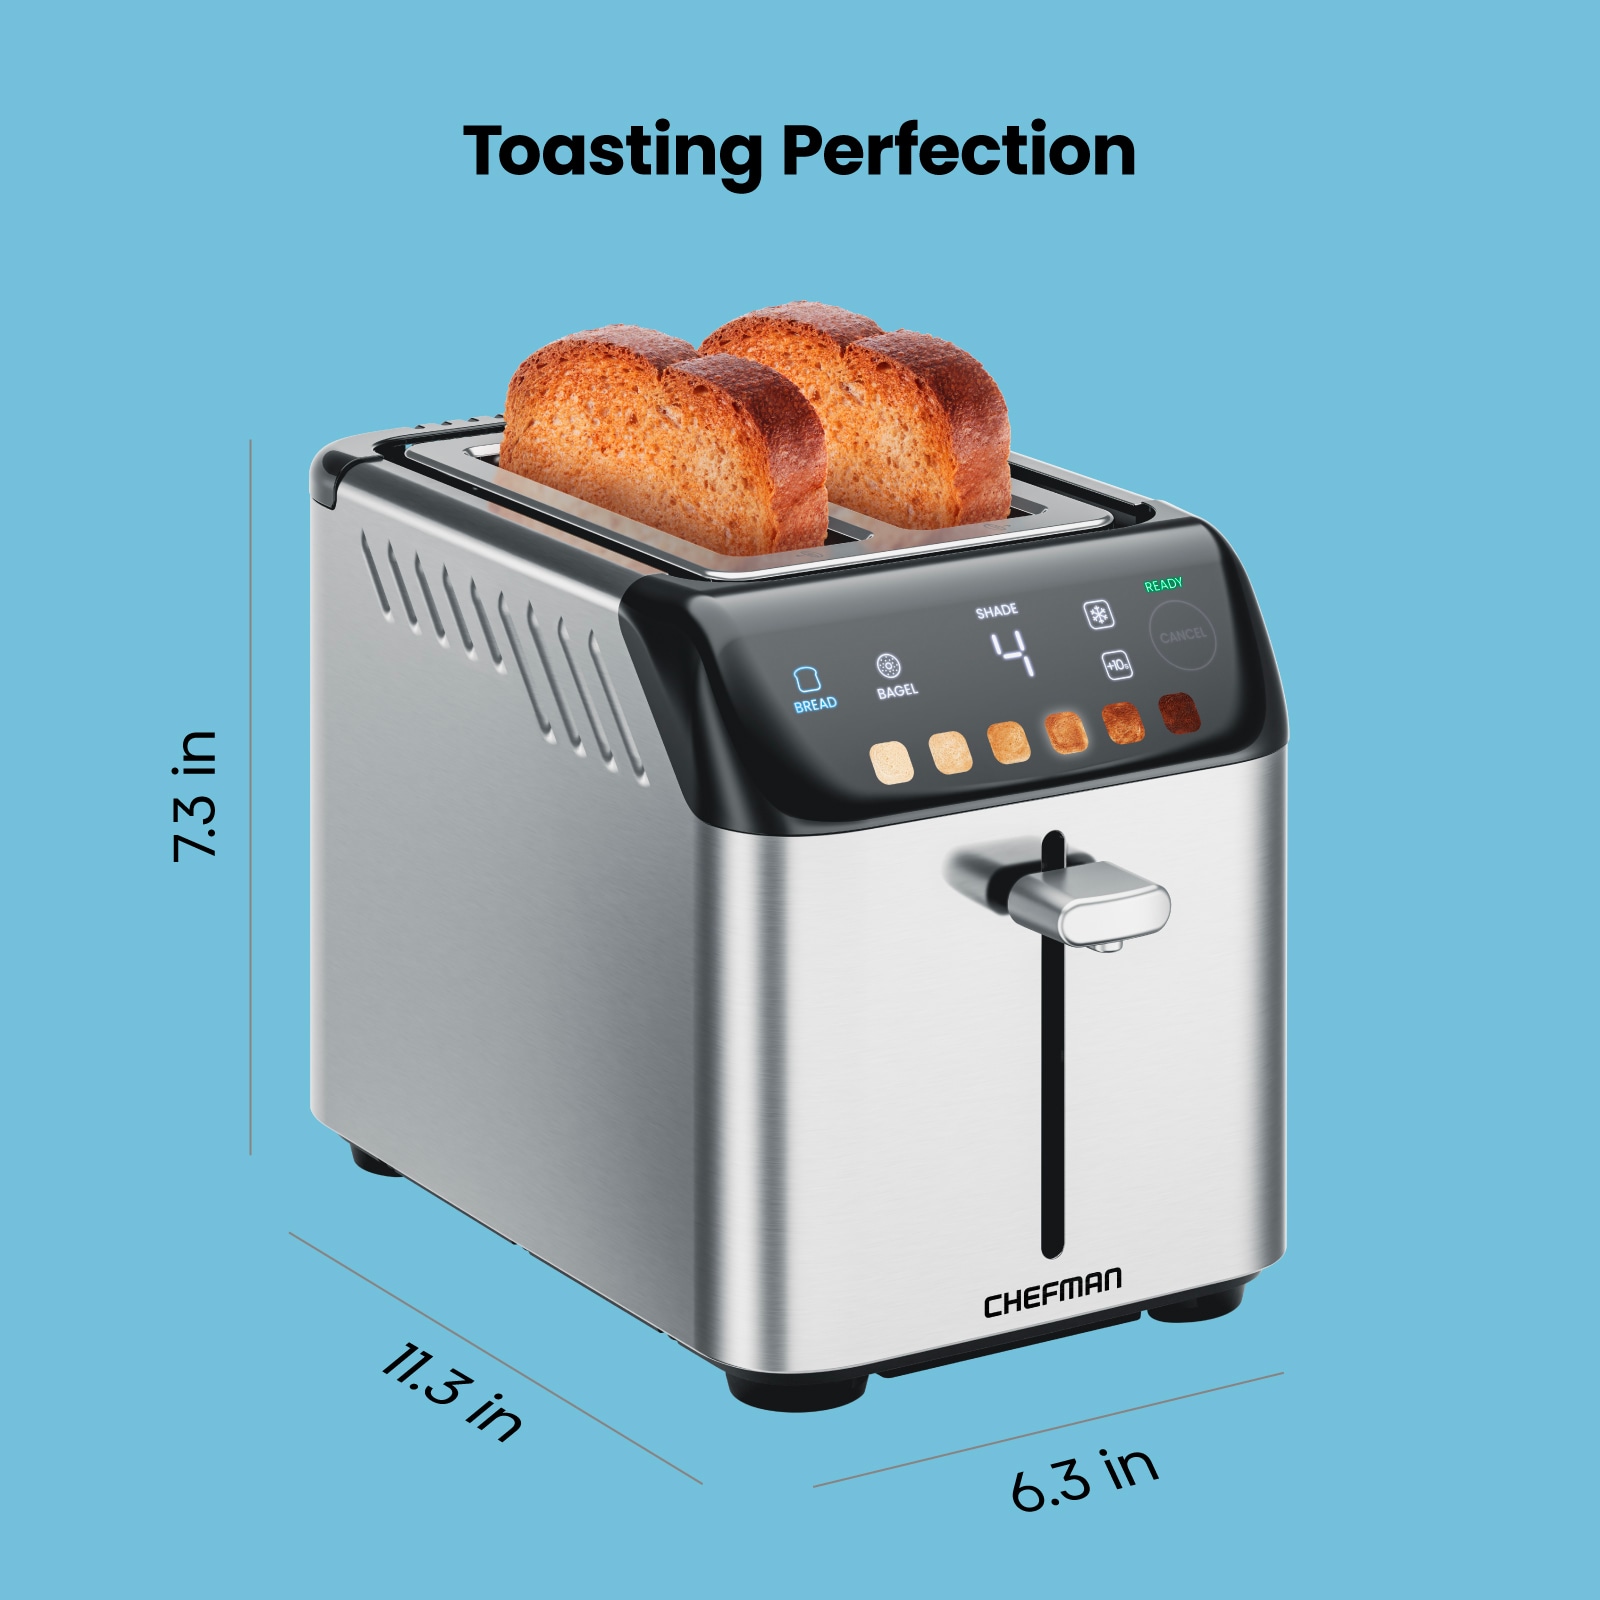 WHALL Touch screen Toaster 2 slice, Stainless Steel Digital Timer Toaster  with Sound Function, Smart Extra